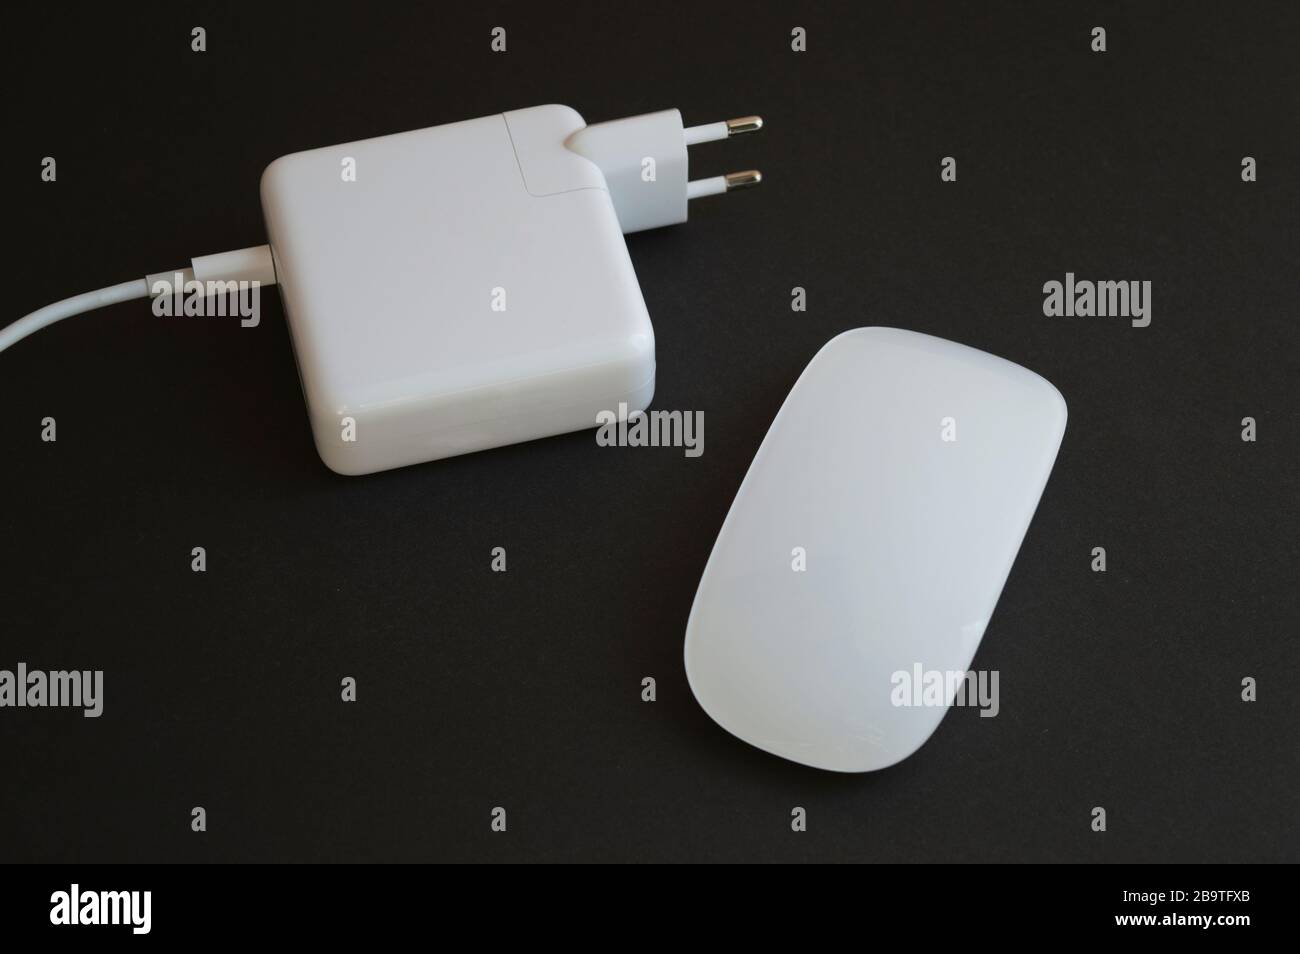 Minimalistic combination of white mouse and charger for laptop on the dark background Stock Photo